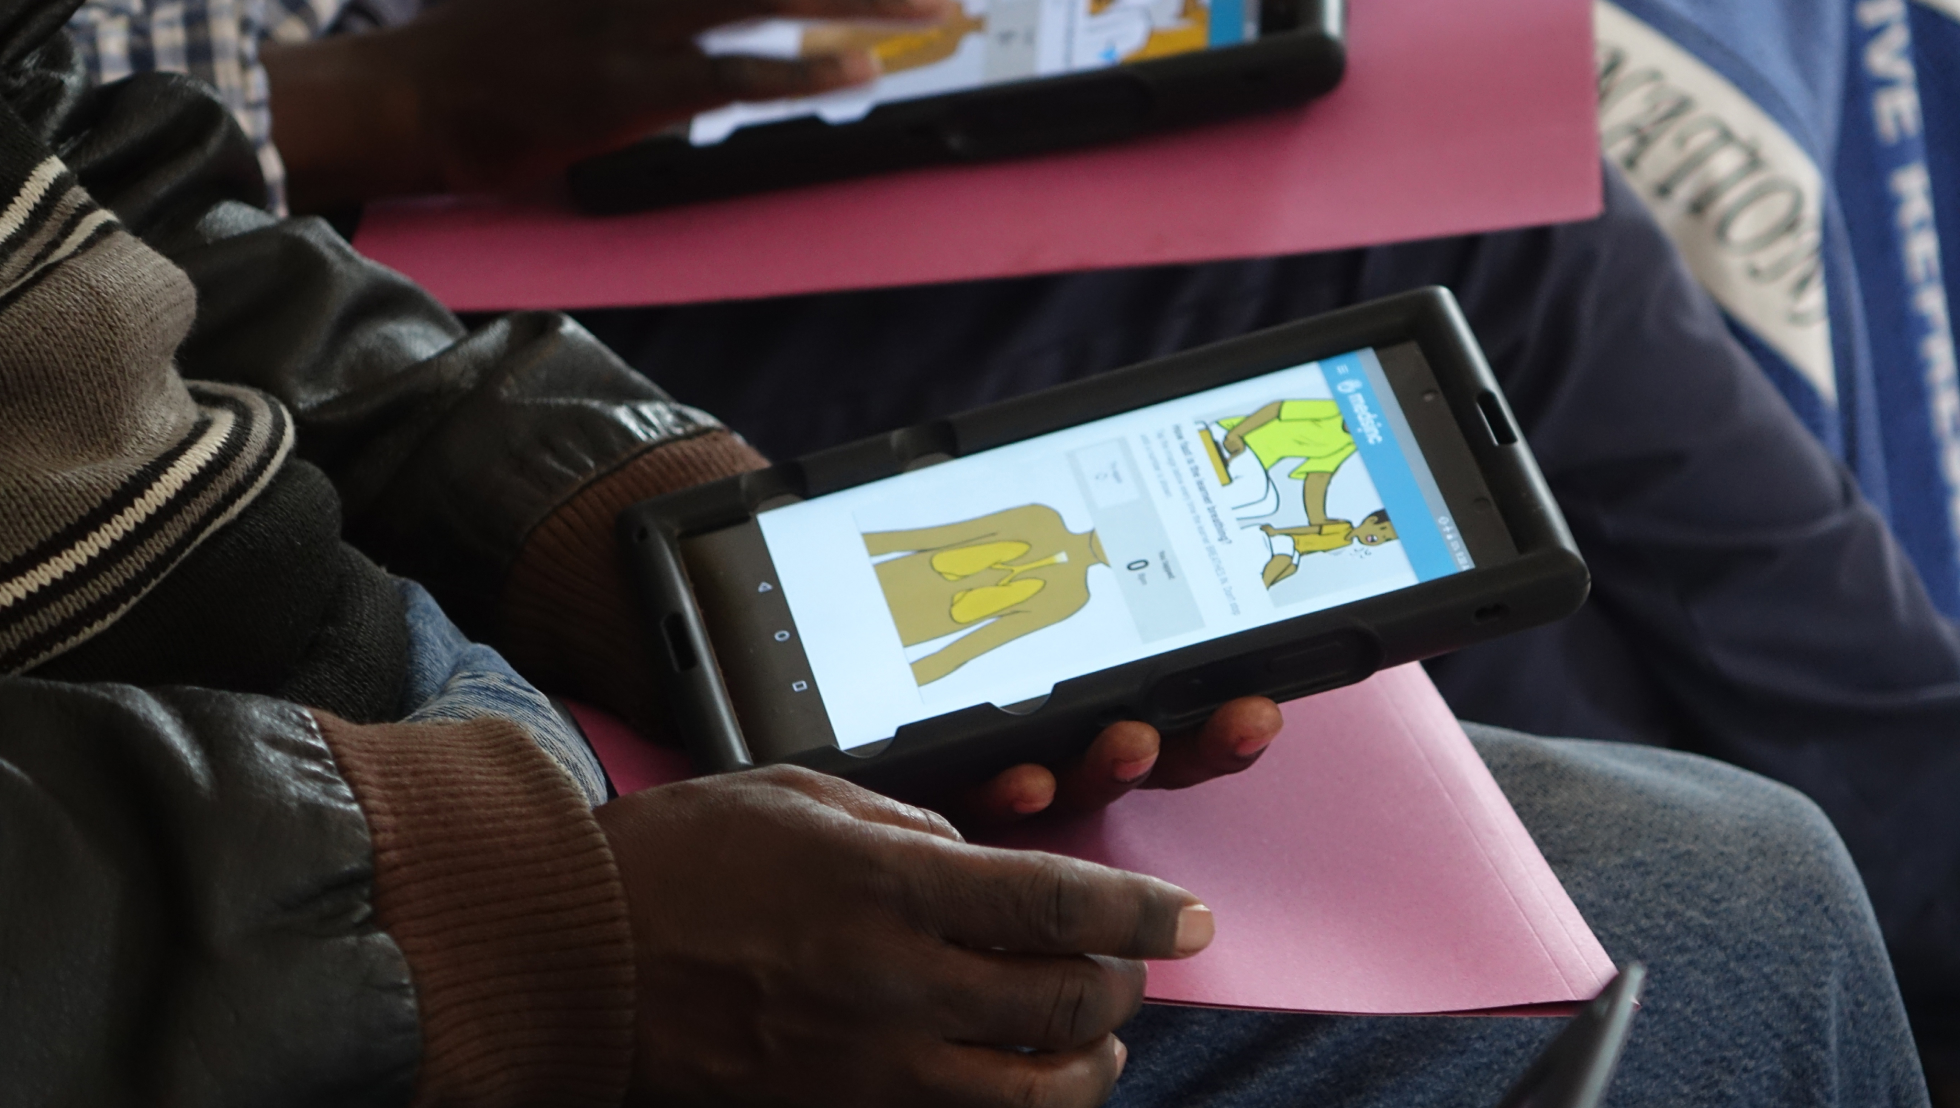 THINKMD Partners with Healthy Learners to Scale School-based Health Program in Zambia